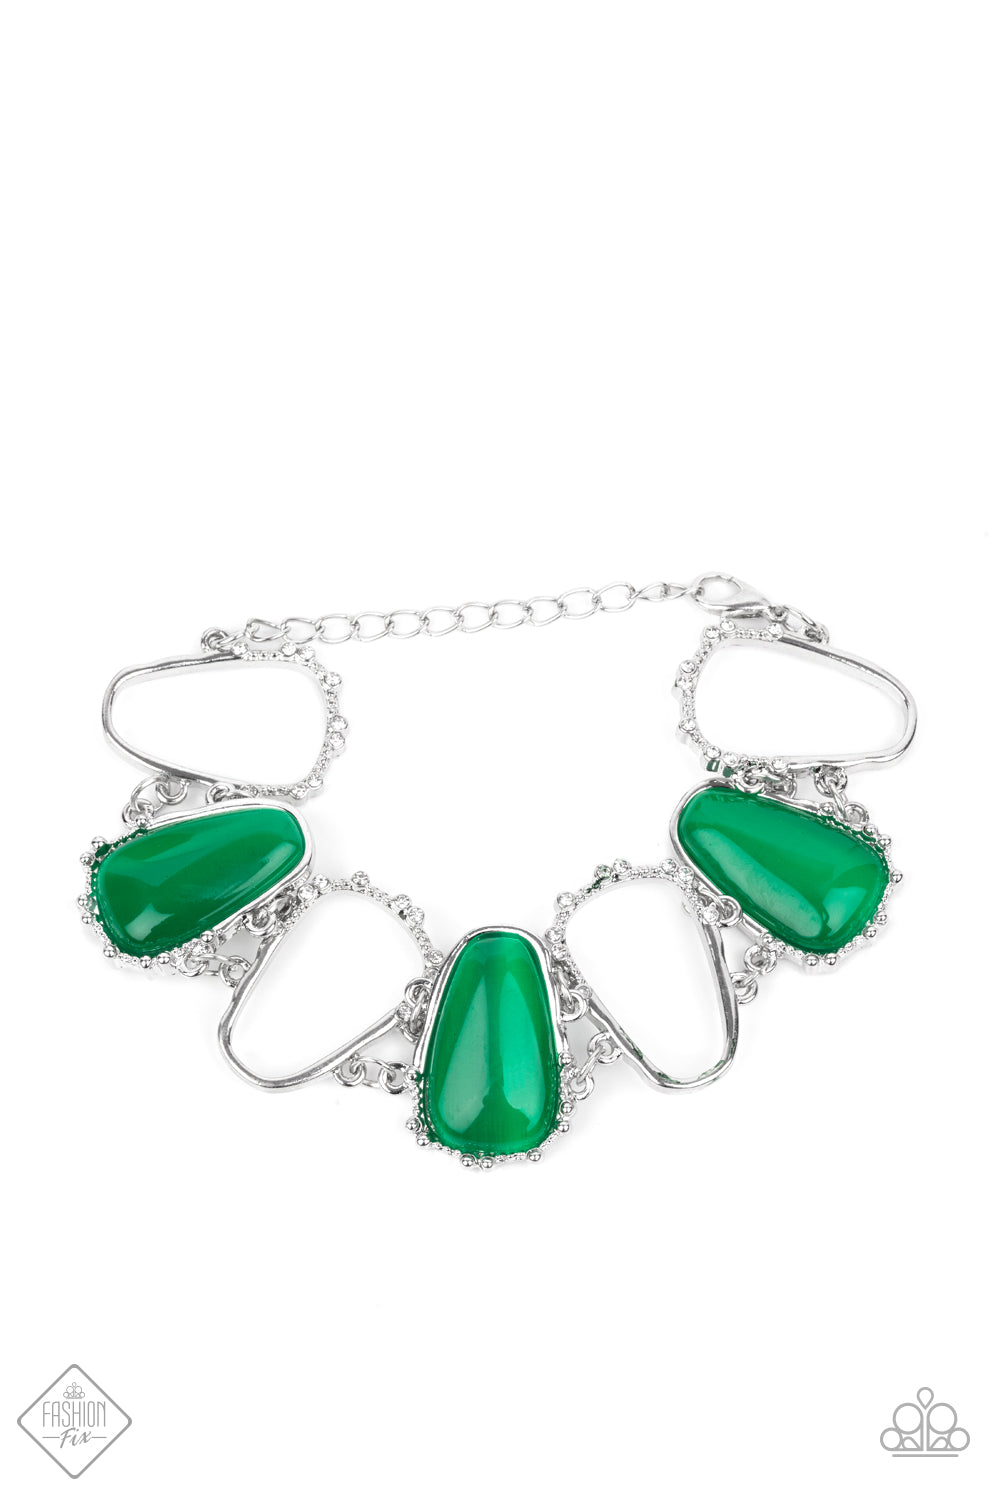 shop-sassy-affordable- yacht-club-couture-green-paparazzi-accessories